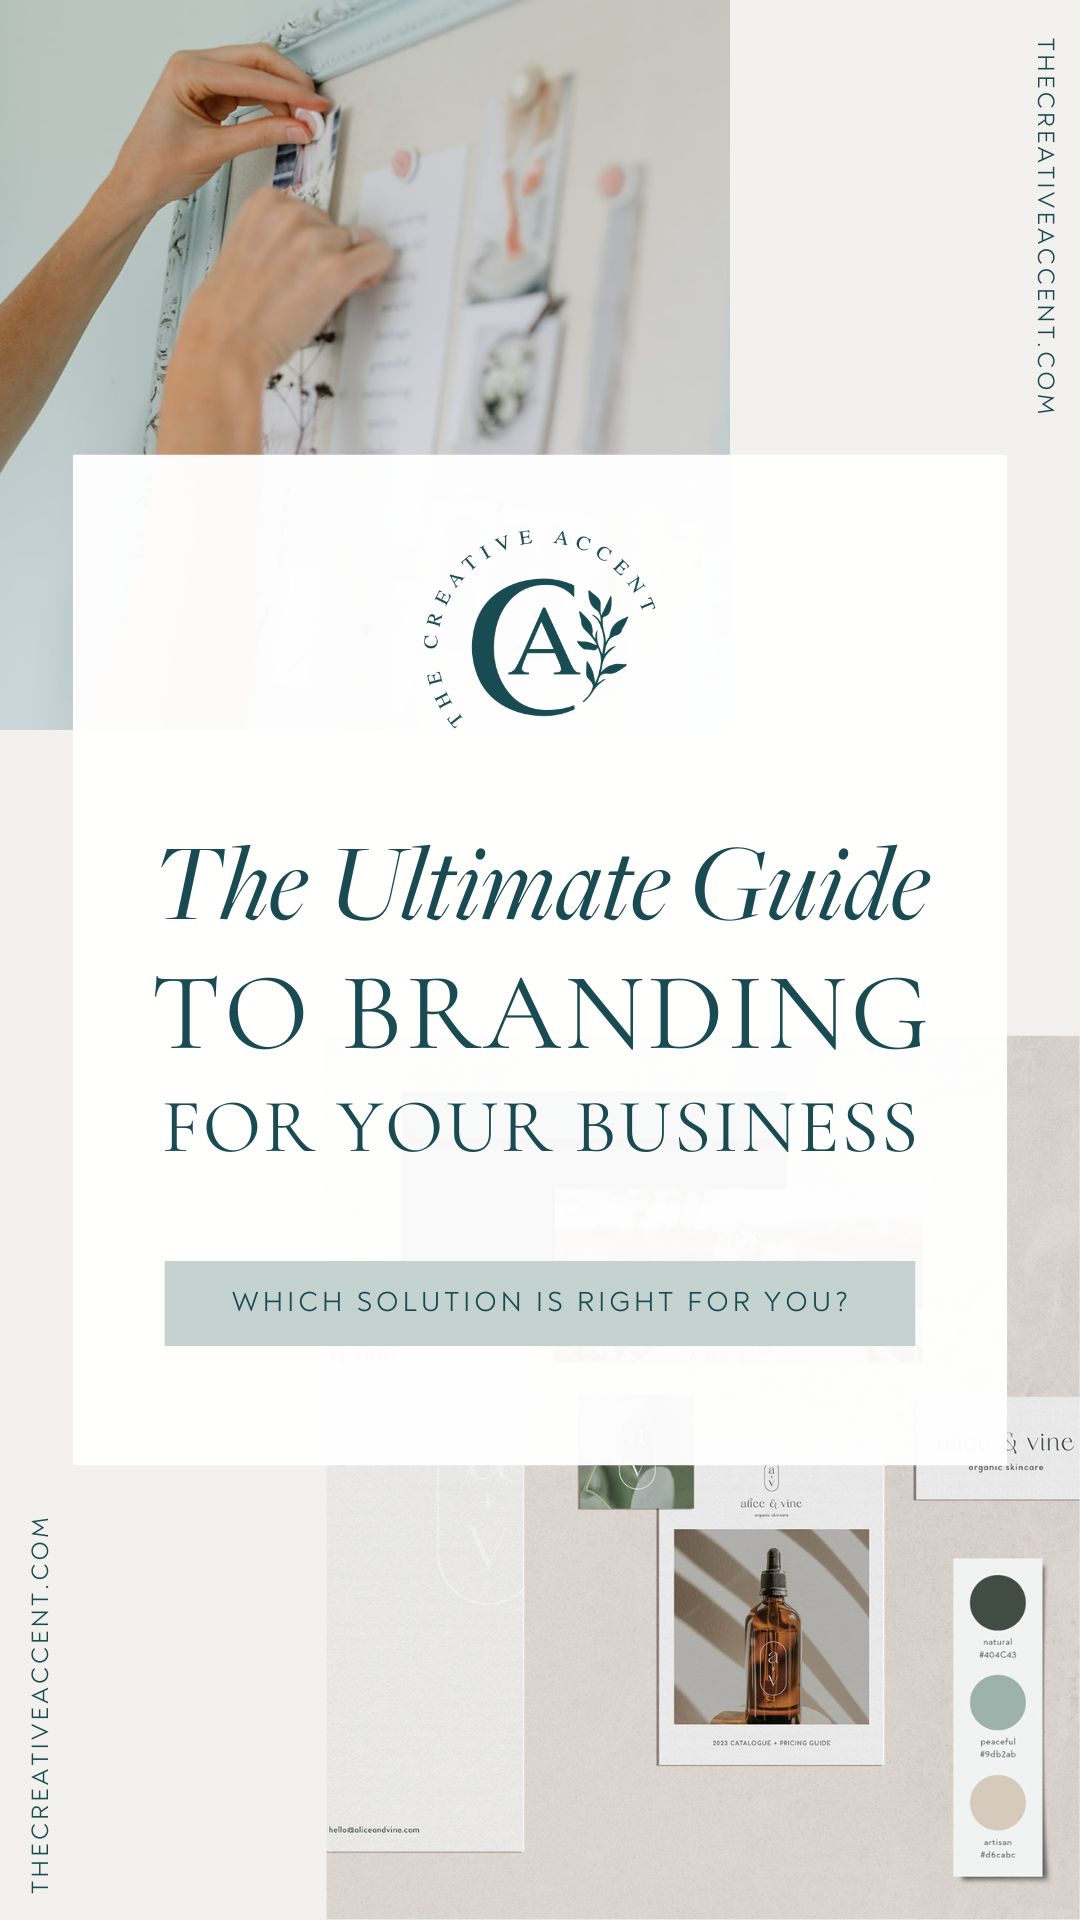 The ultimate guide to branding for your business